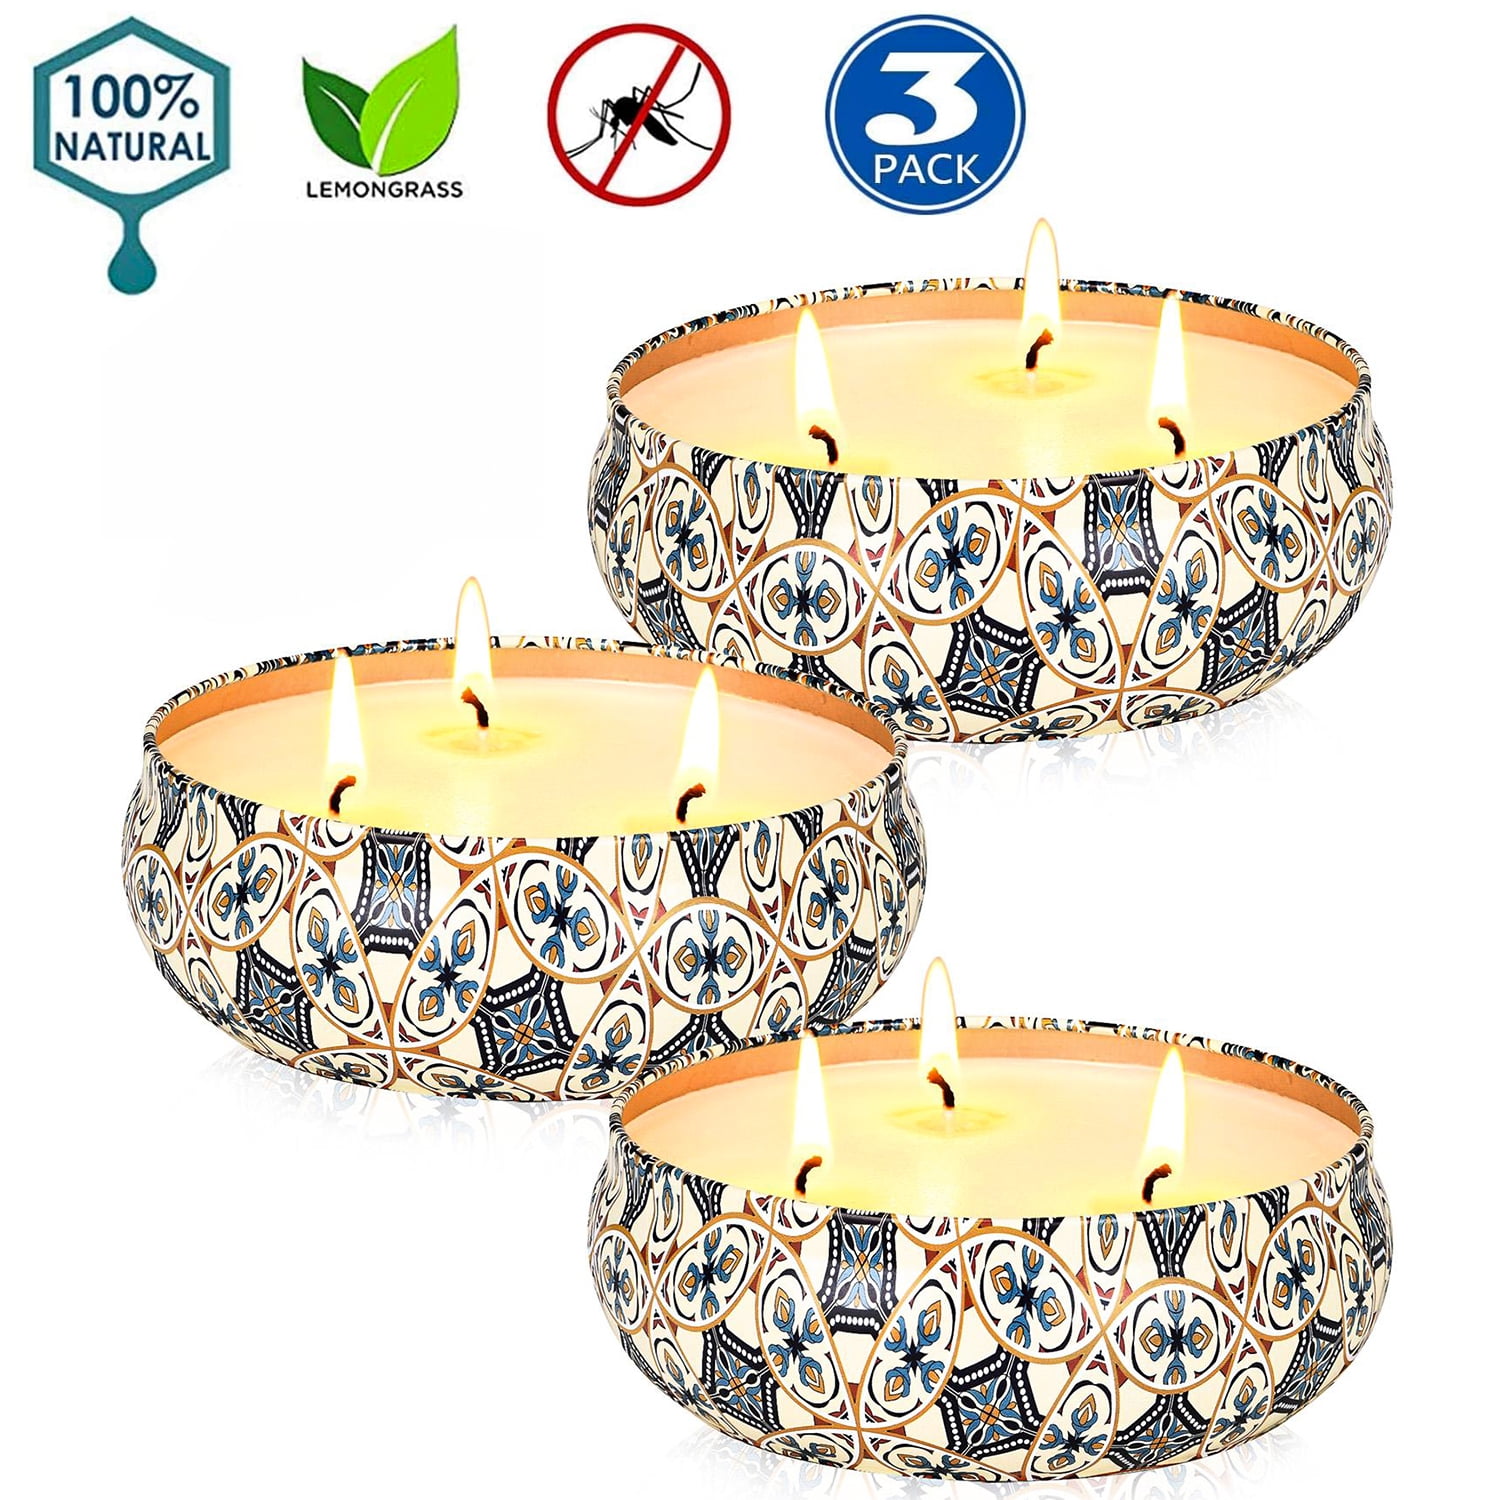 Anti-mosquito Citronella Oil Porch Deck or Campsite Patio Perfect in Garden YUE GANG Citronella Candles Outdoor Scented Candles Set with 100% Natural Soy Wax 4×7.2 Oz 